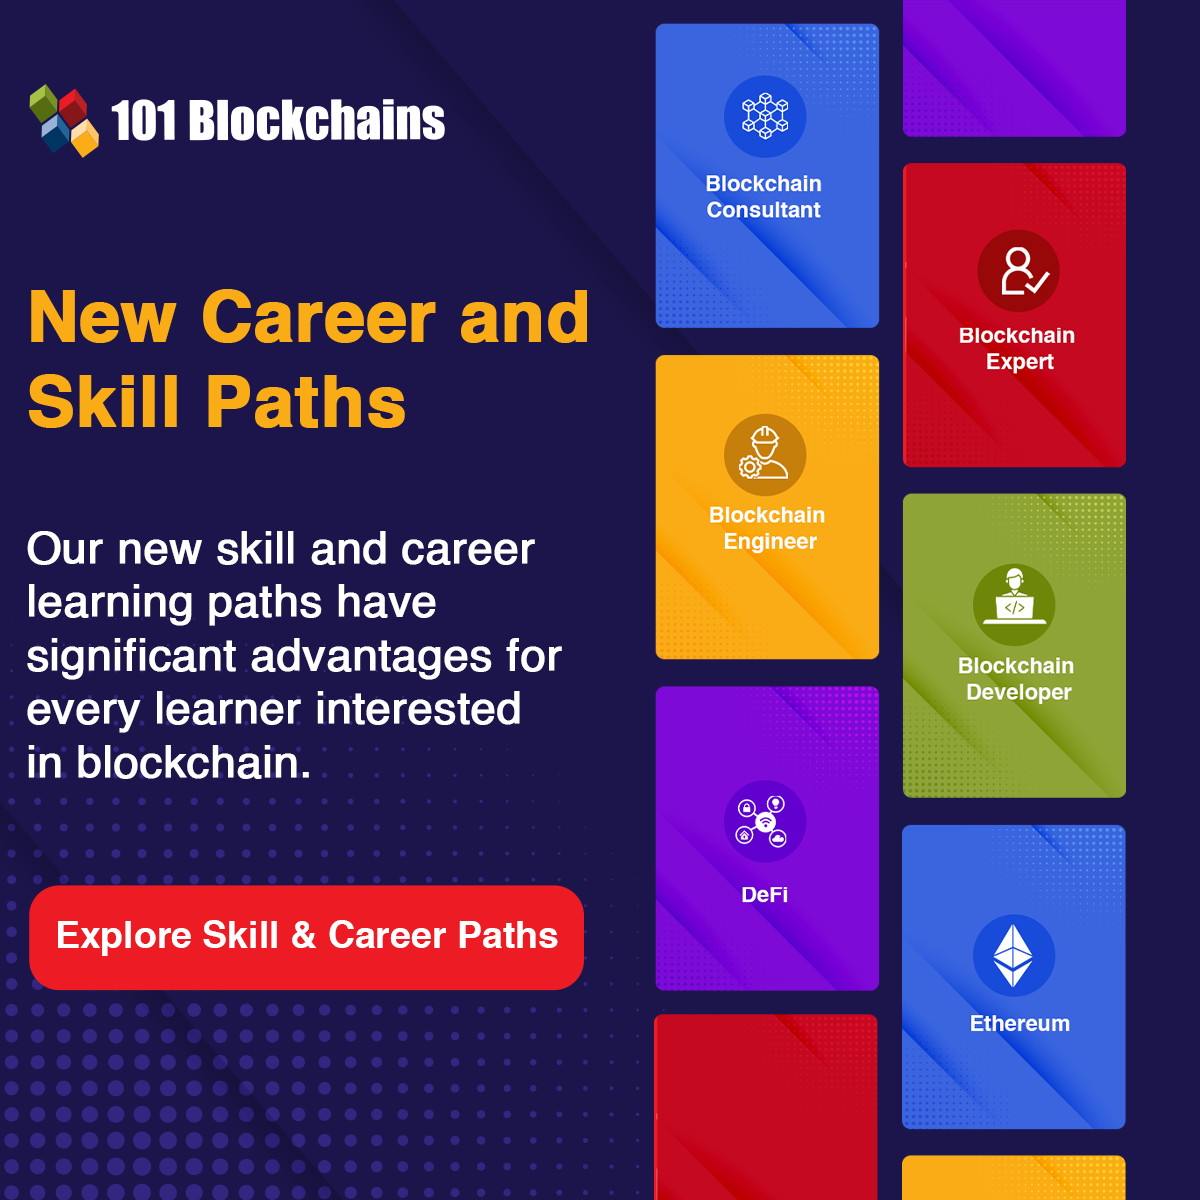 New Career and Skill Paths